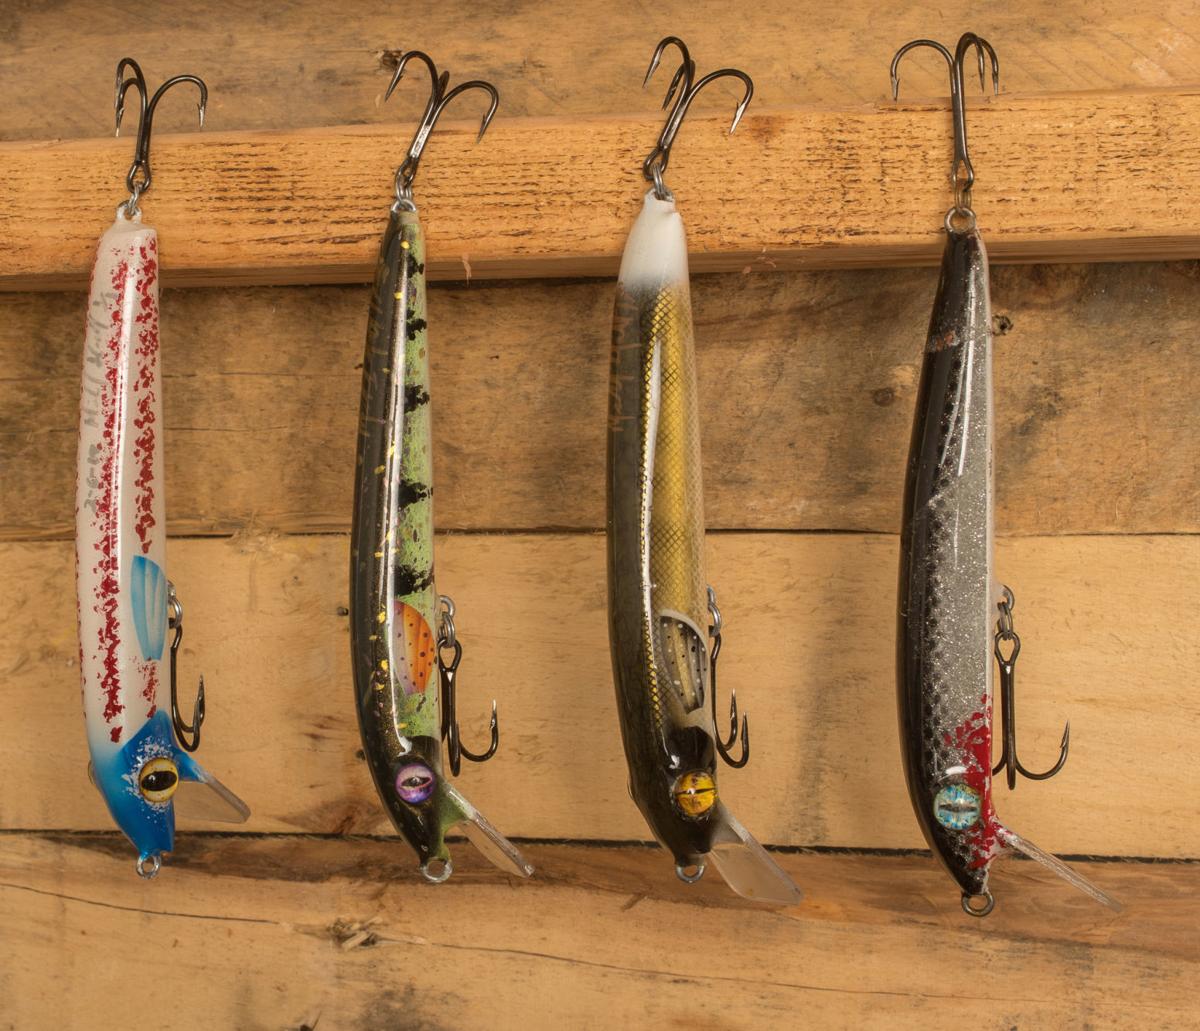 Download Toys Games Sports Outdoor Recreation Muskie Lure Hand Painted